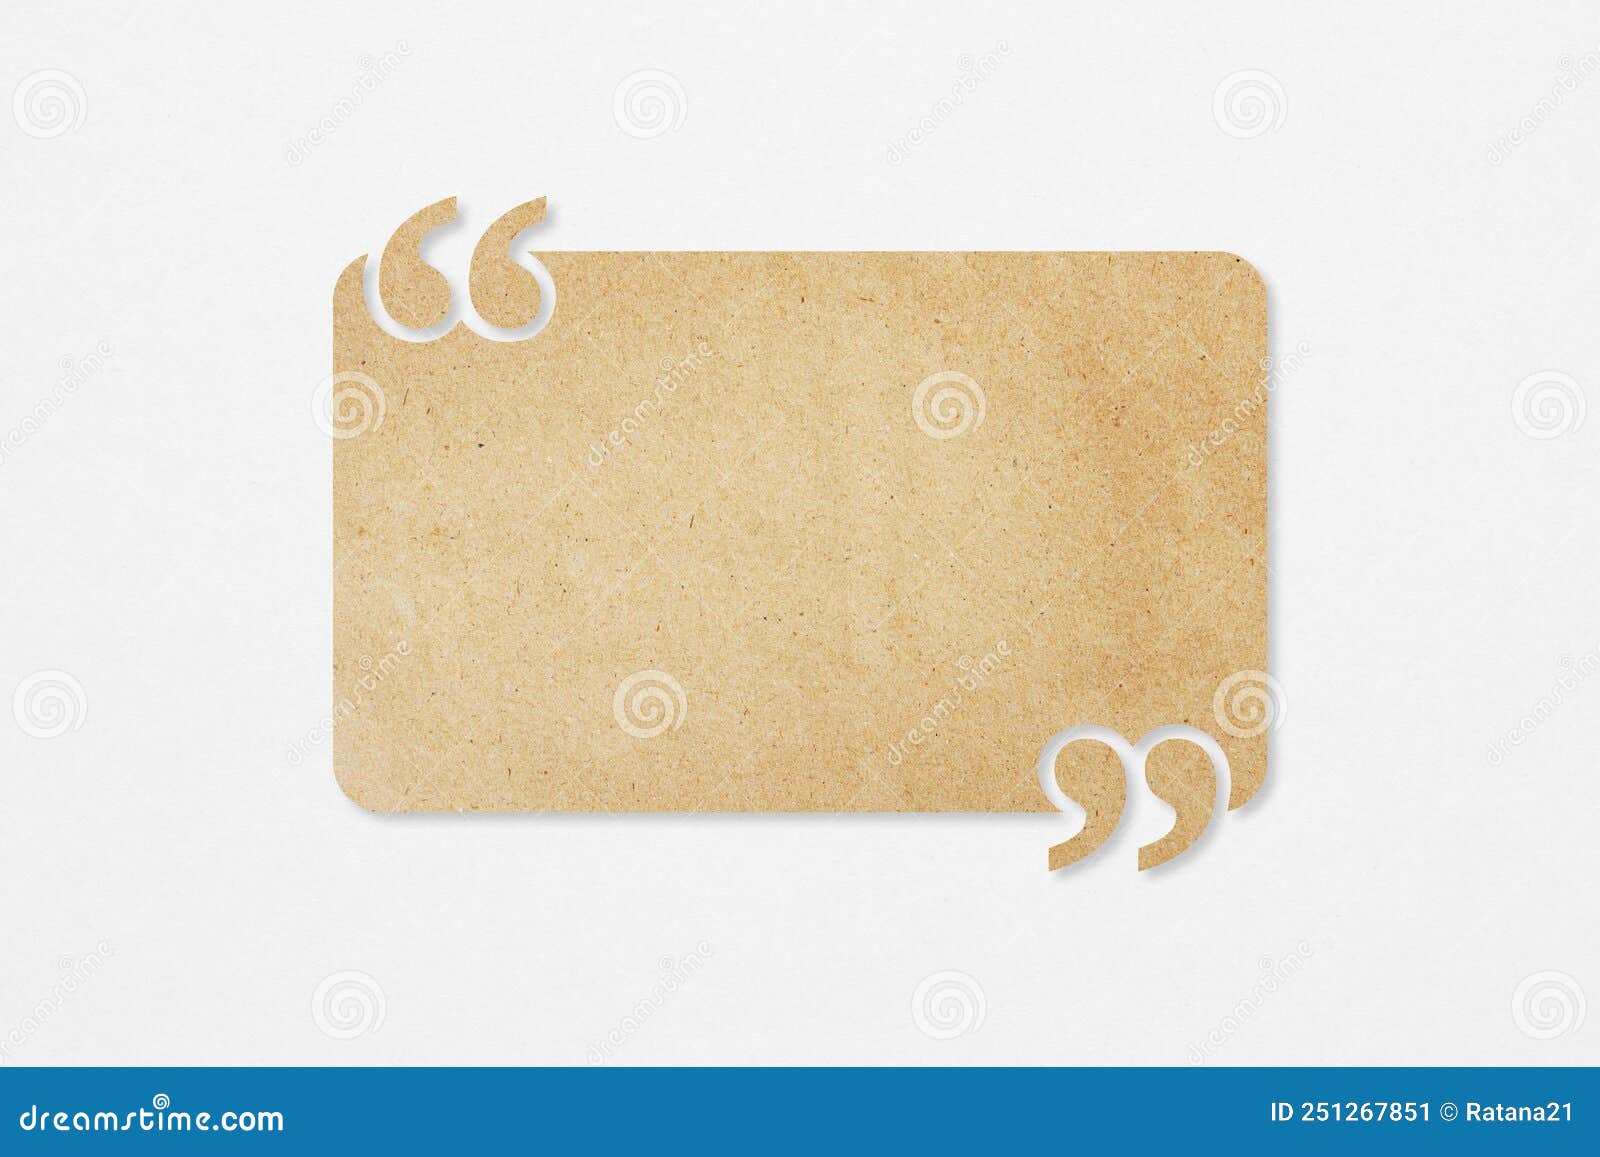 brown paper quote background with quotation marks on grunge white paper including clipping path, useful for customer